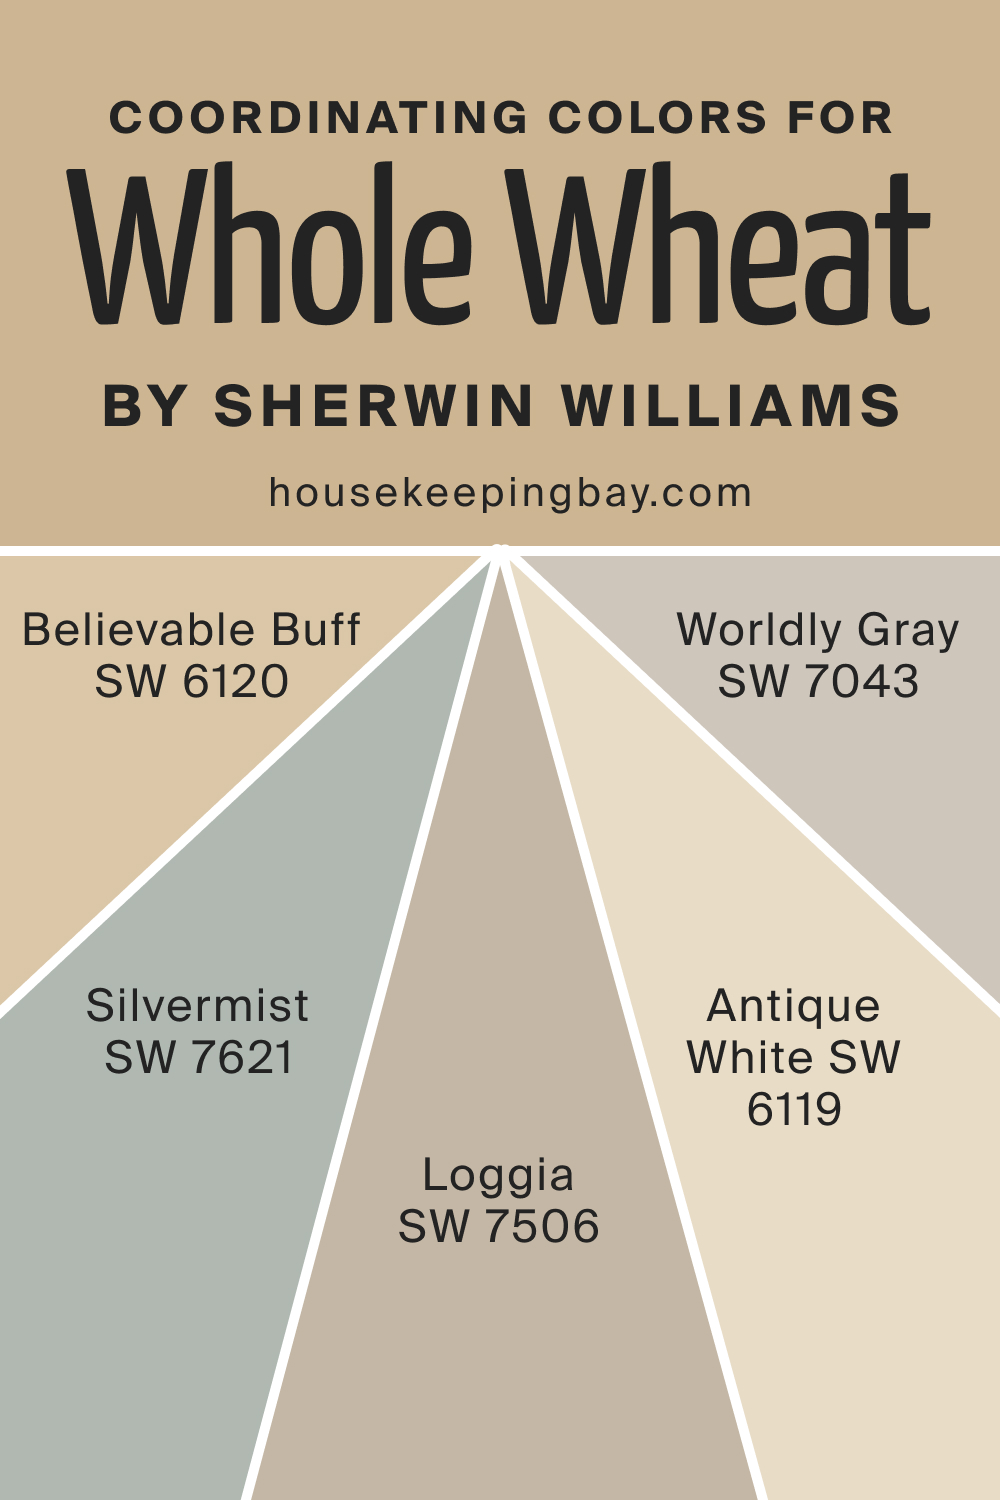 Coordinating Colors for SW Whole Wheat by Sherwin Williams